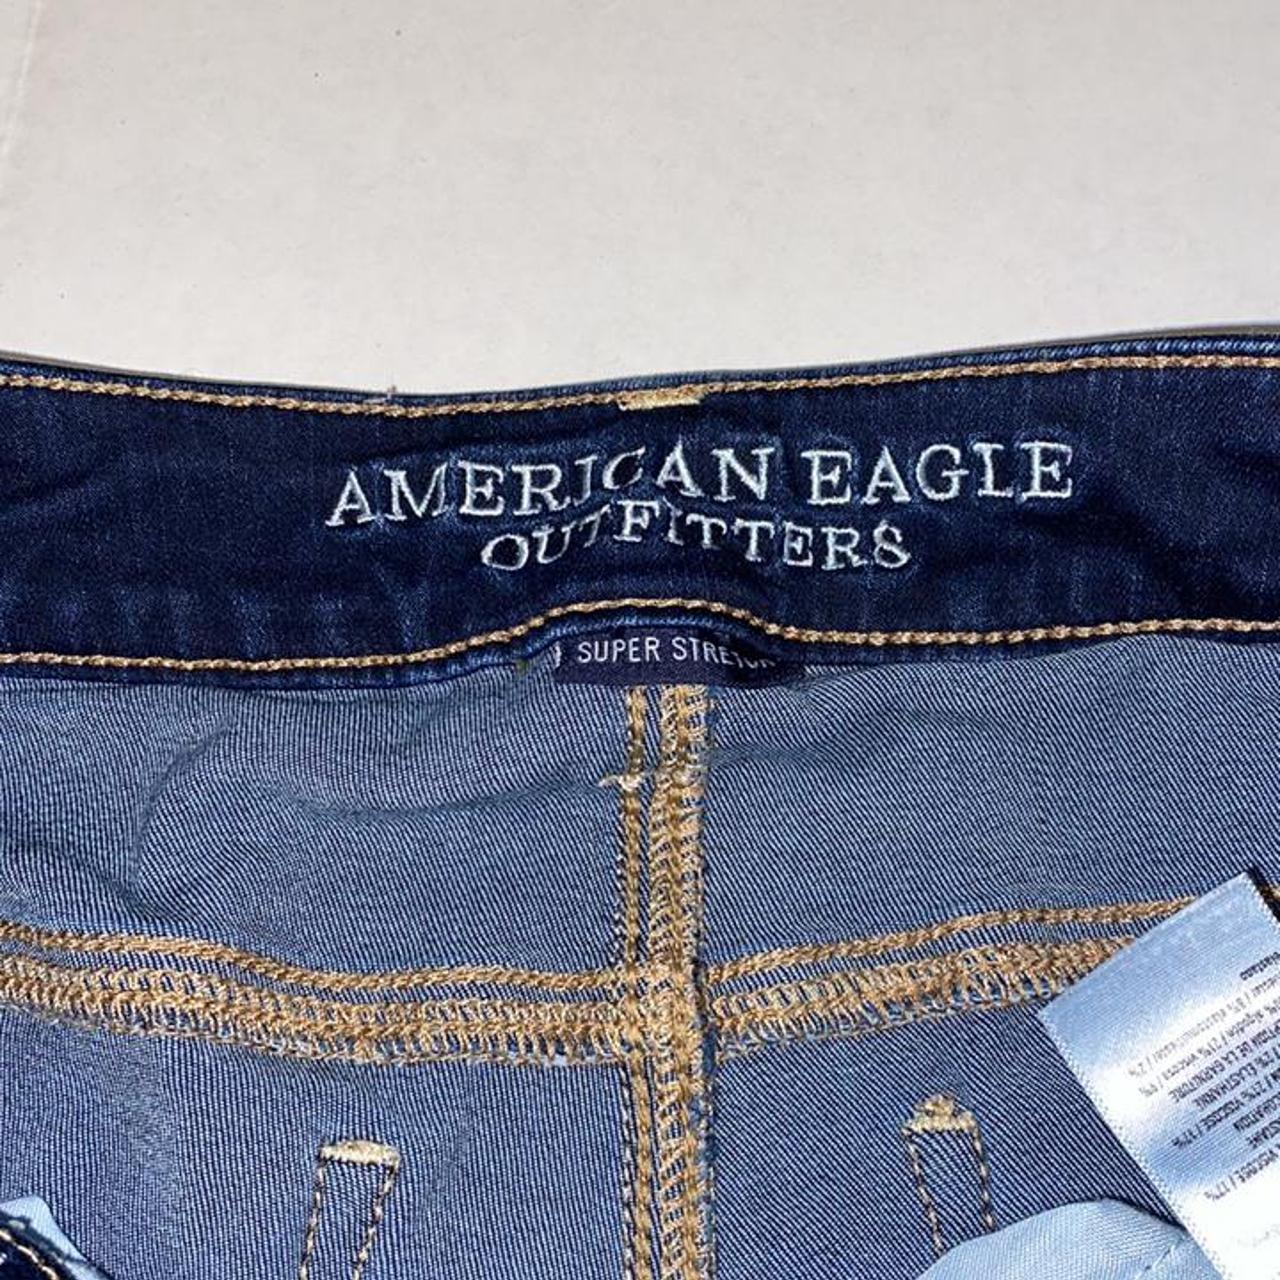 Product Image 3 - American Eagle Super Stretch Jegging

Size